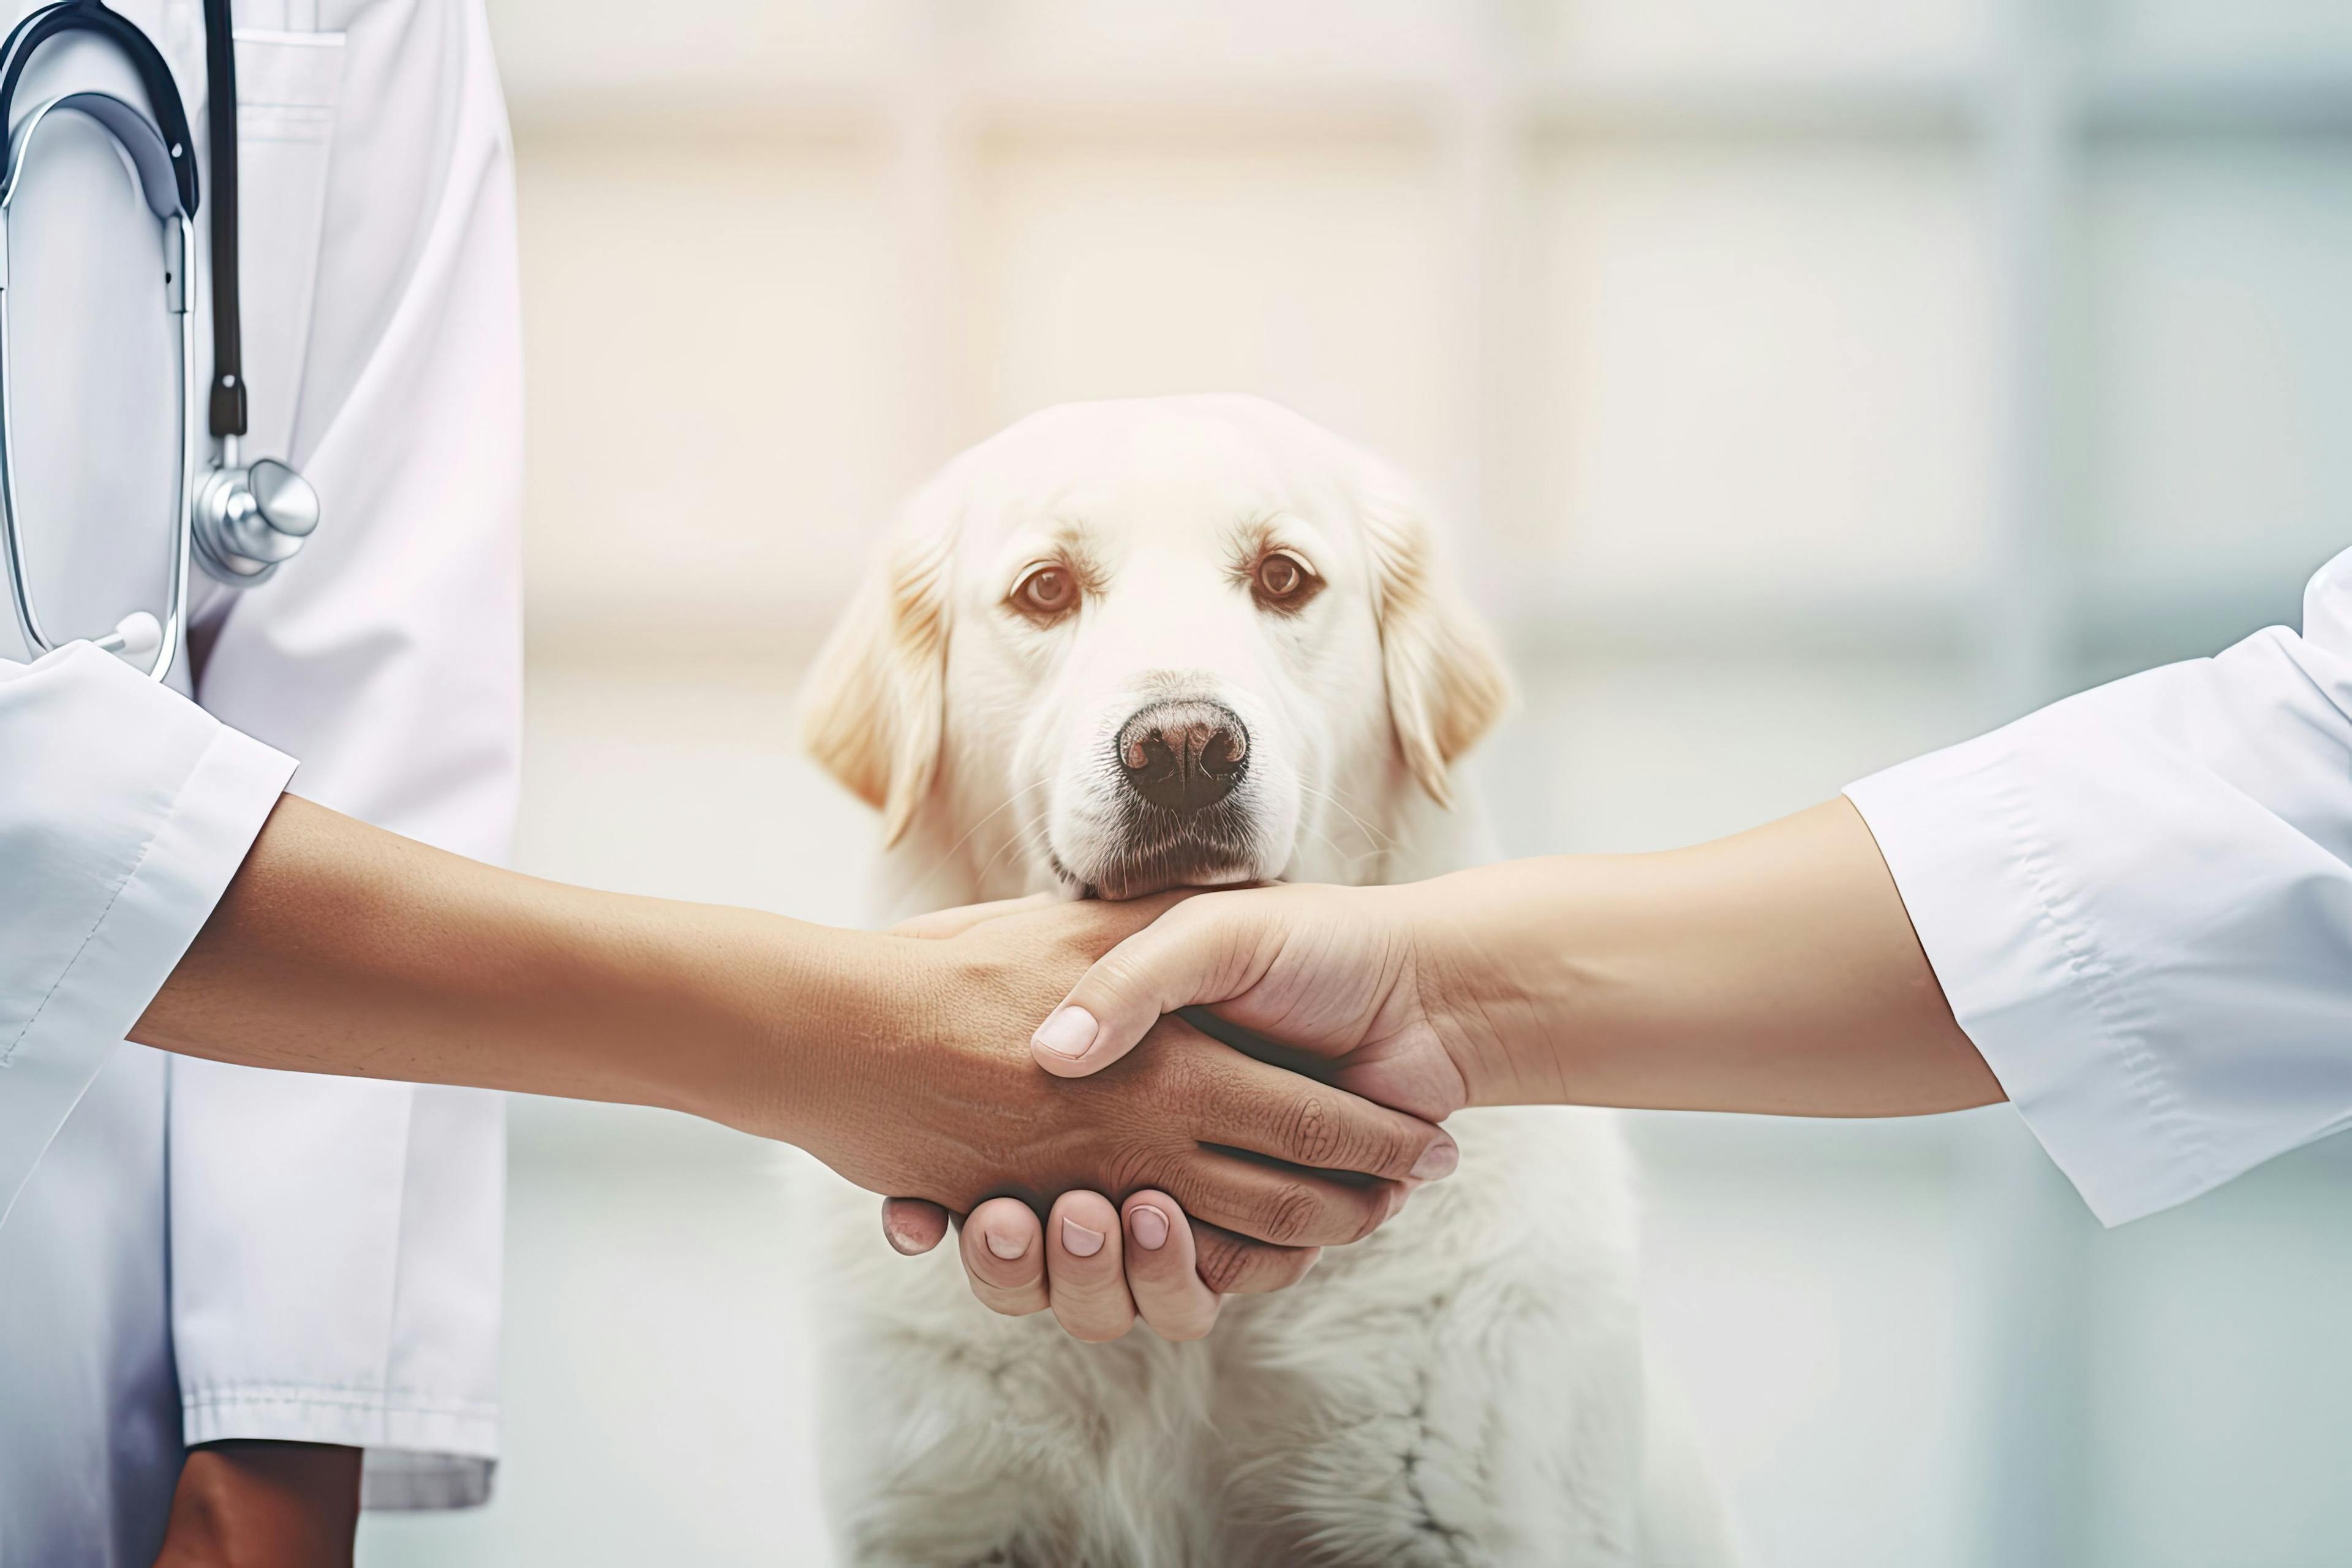 Veterinary technology and services company expands strategic partnership with veterinary network